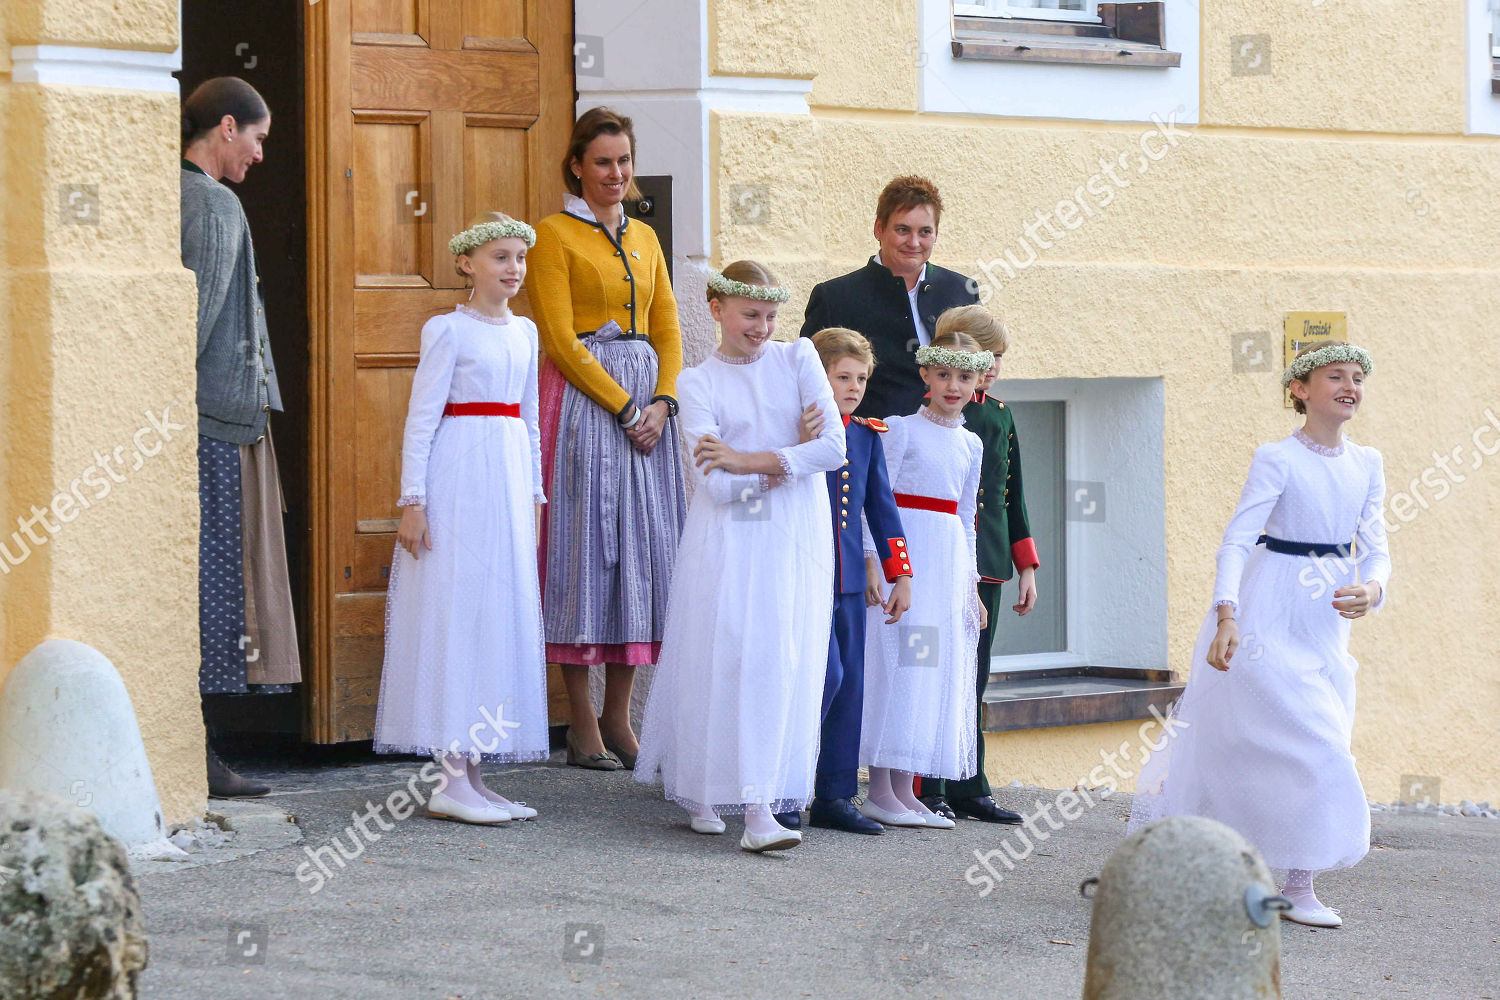 duchess-sophie-of-wurtemberg-and-count-maximilien-of-andigne-wedding-castle-church-tegernsee-germany-shutterstock-editorial-9938934at.jpg